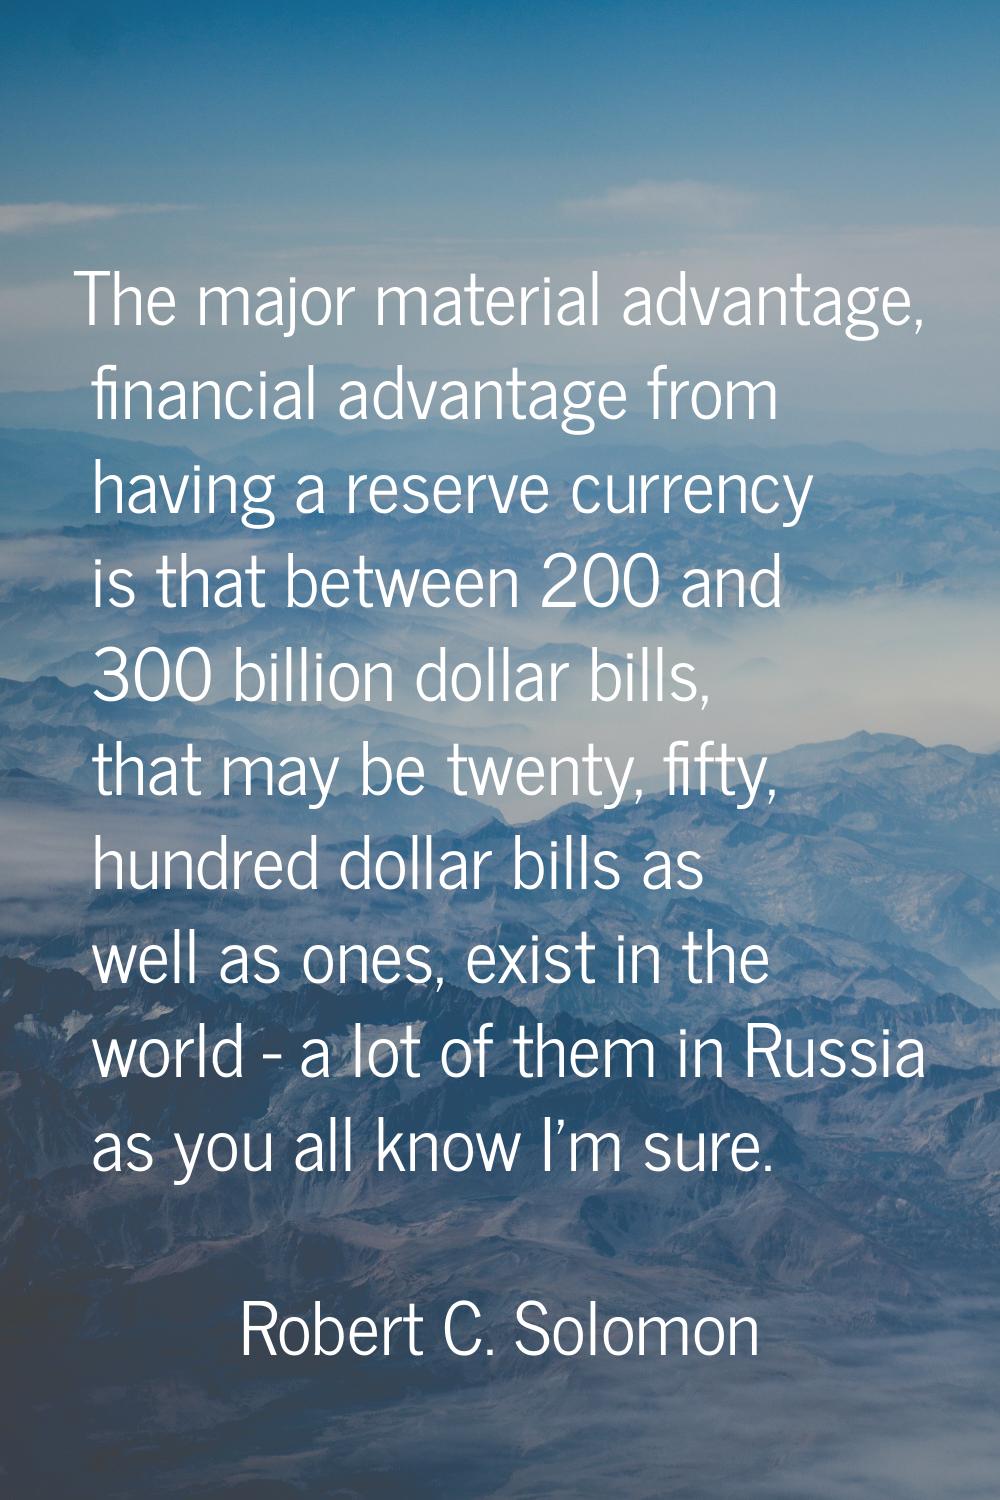 The major material advantage, financial advantage from having a reserve currency is that between 20